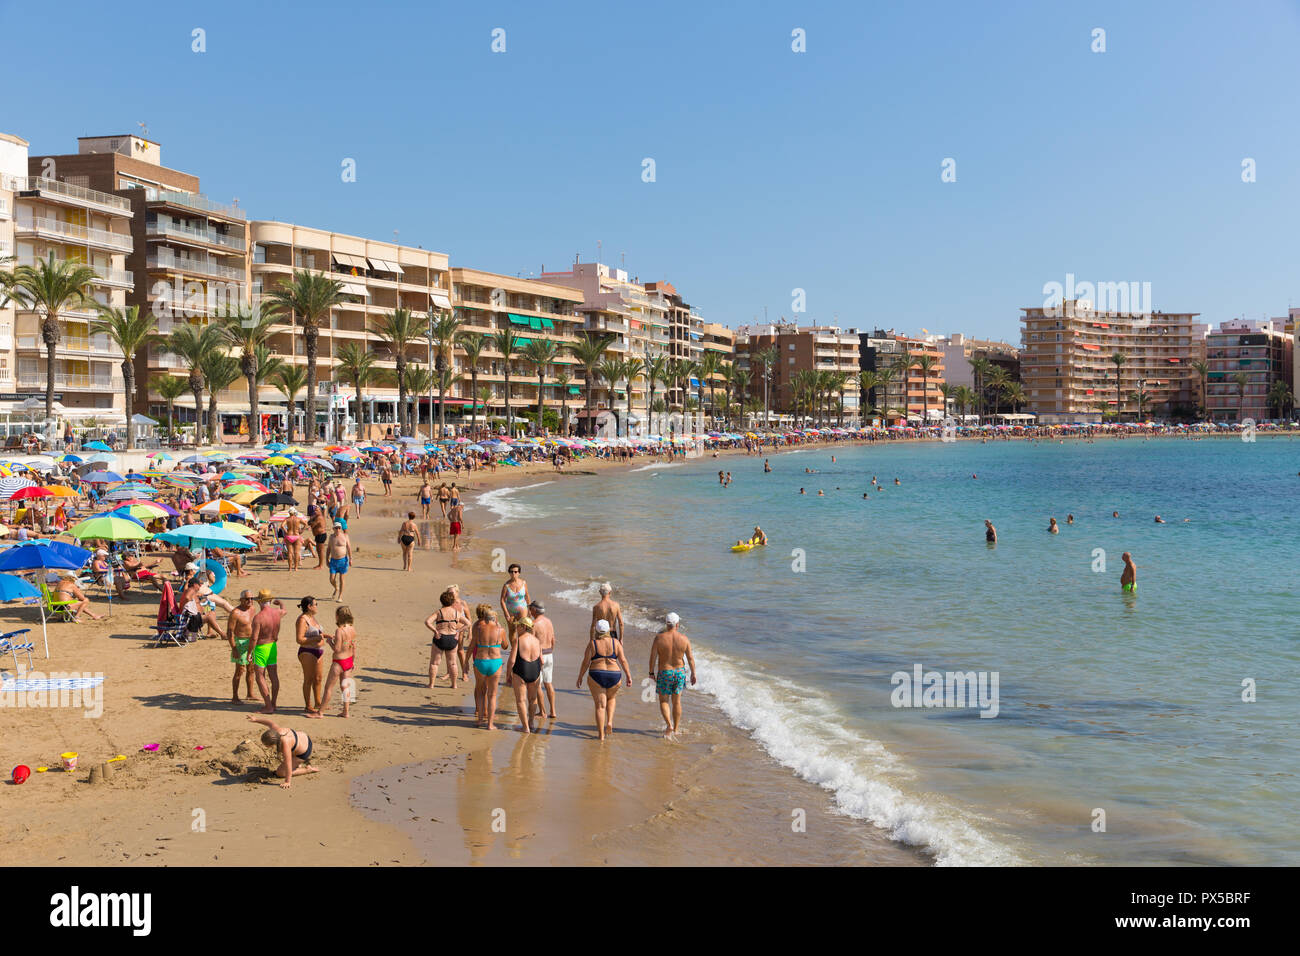 Spanish sunshine Torrevieja beach in October with people enjoying the sea sand and weather Stock Photo